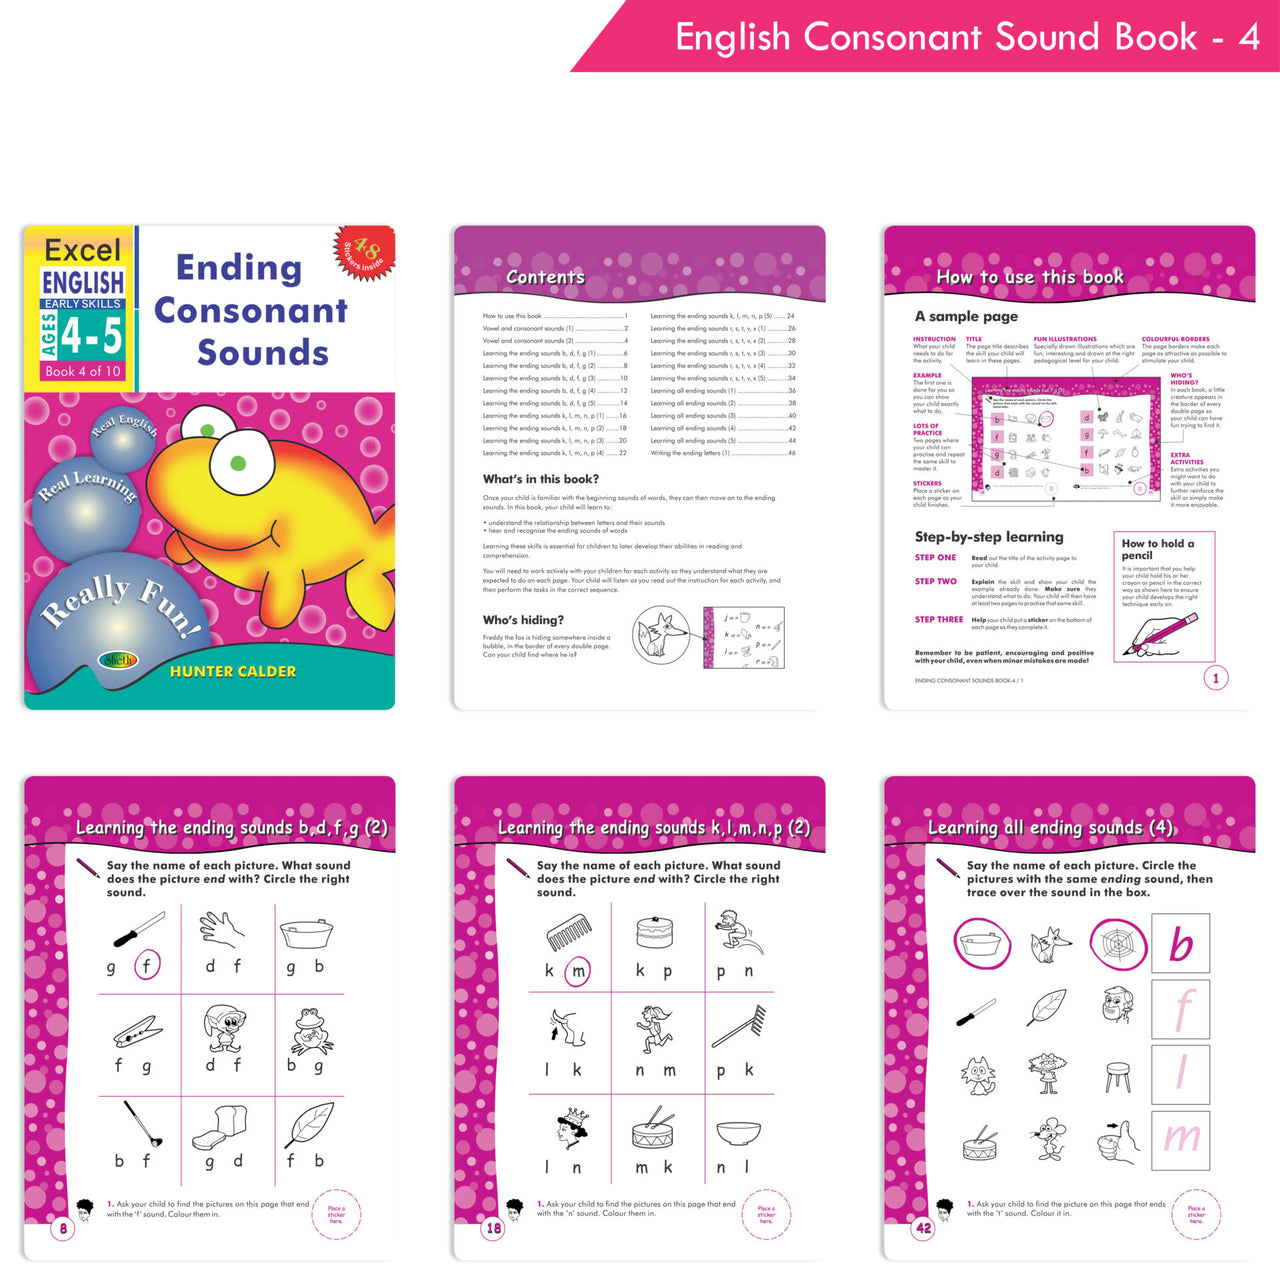 Excel English Early Skills Ages 4 - 5 Years (Set of 3) | Beginning, Ending Consonant & Vowel Sound Books for Junior KG - Distacart